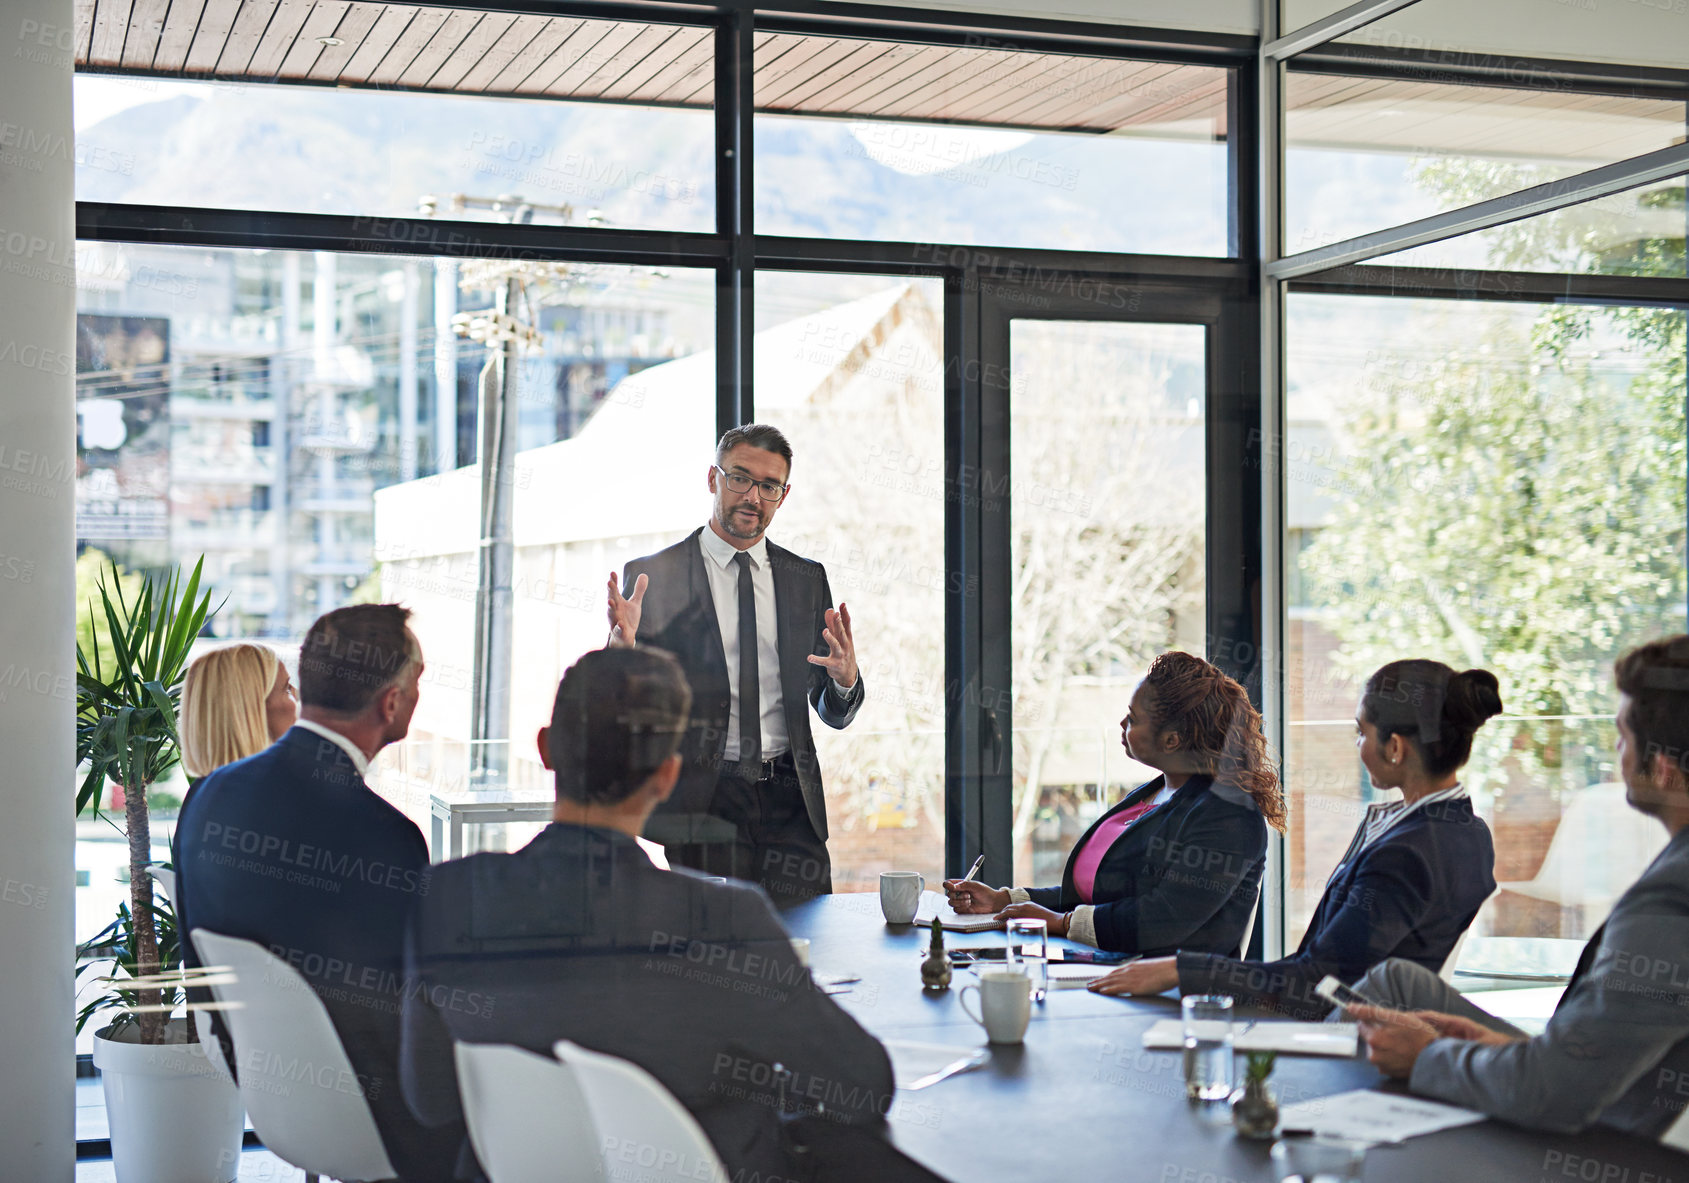 Buy stock photo Shot of an executive giving a presentation to colleagues in a boardroom